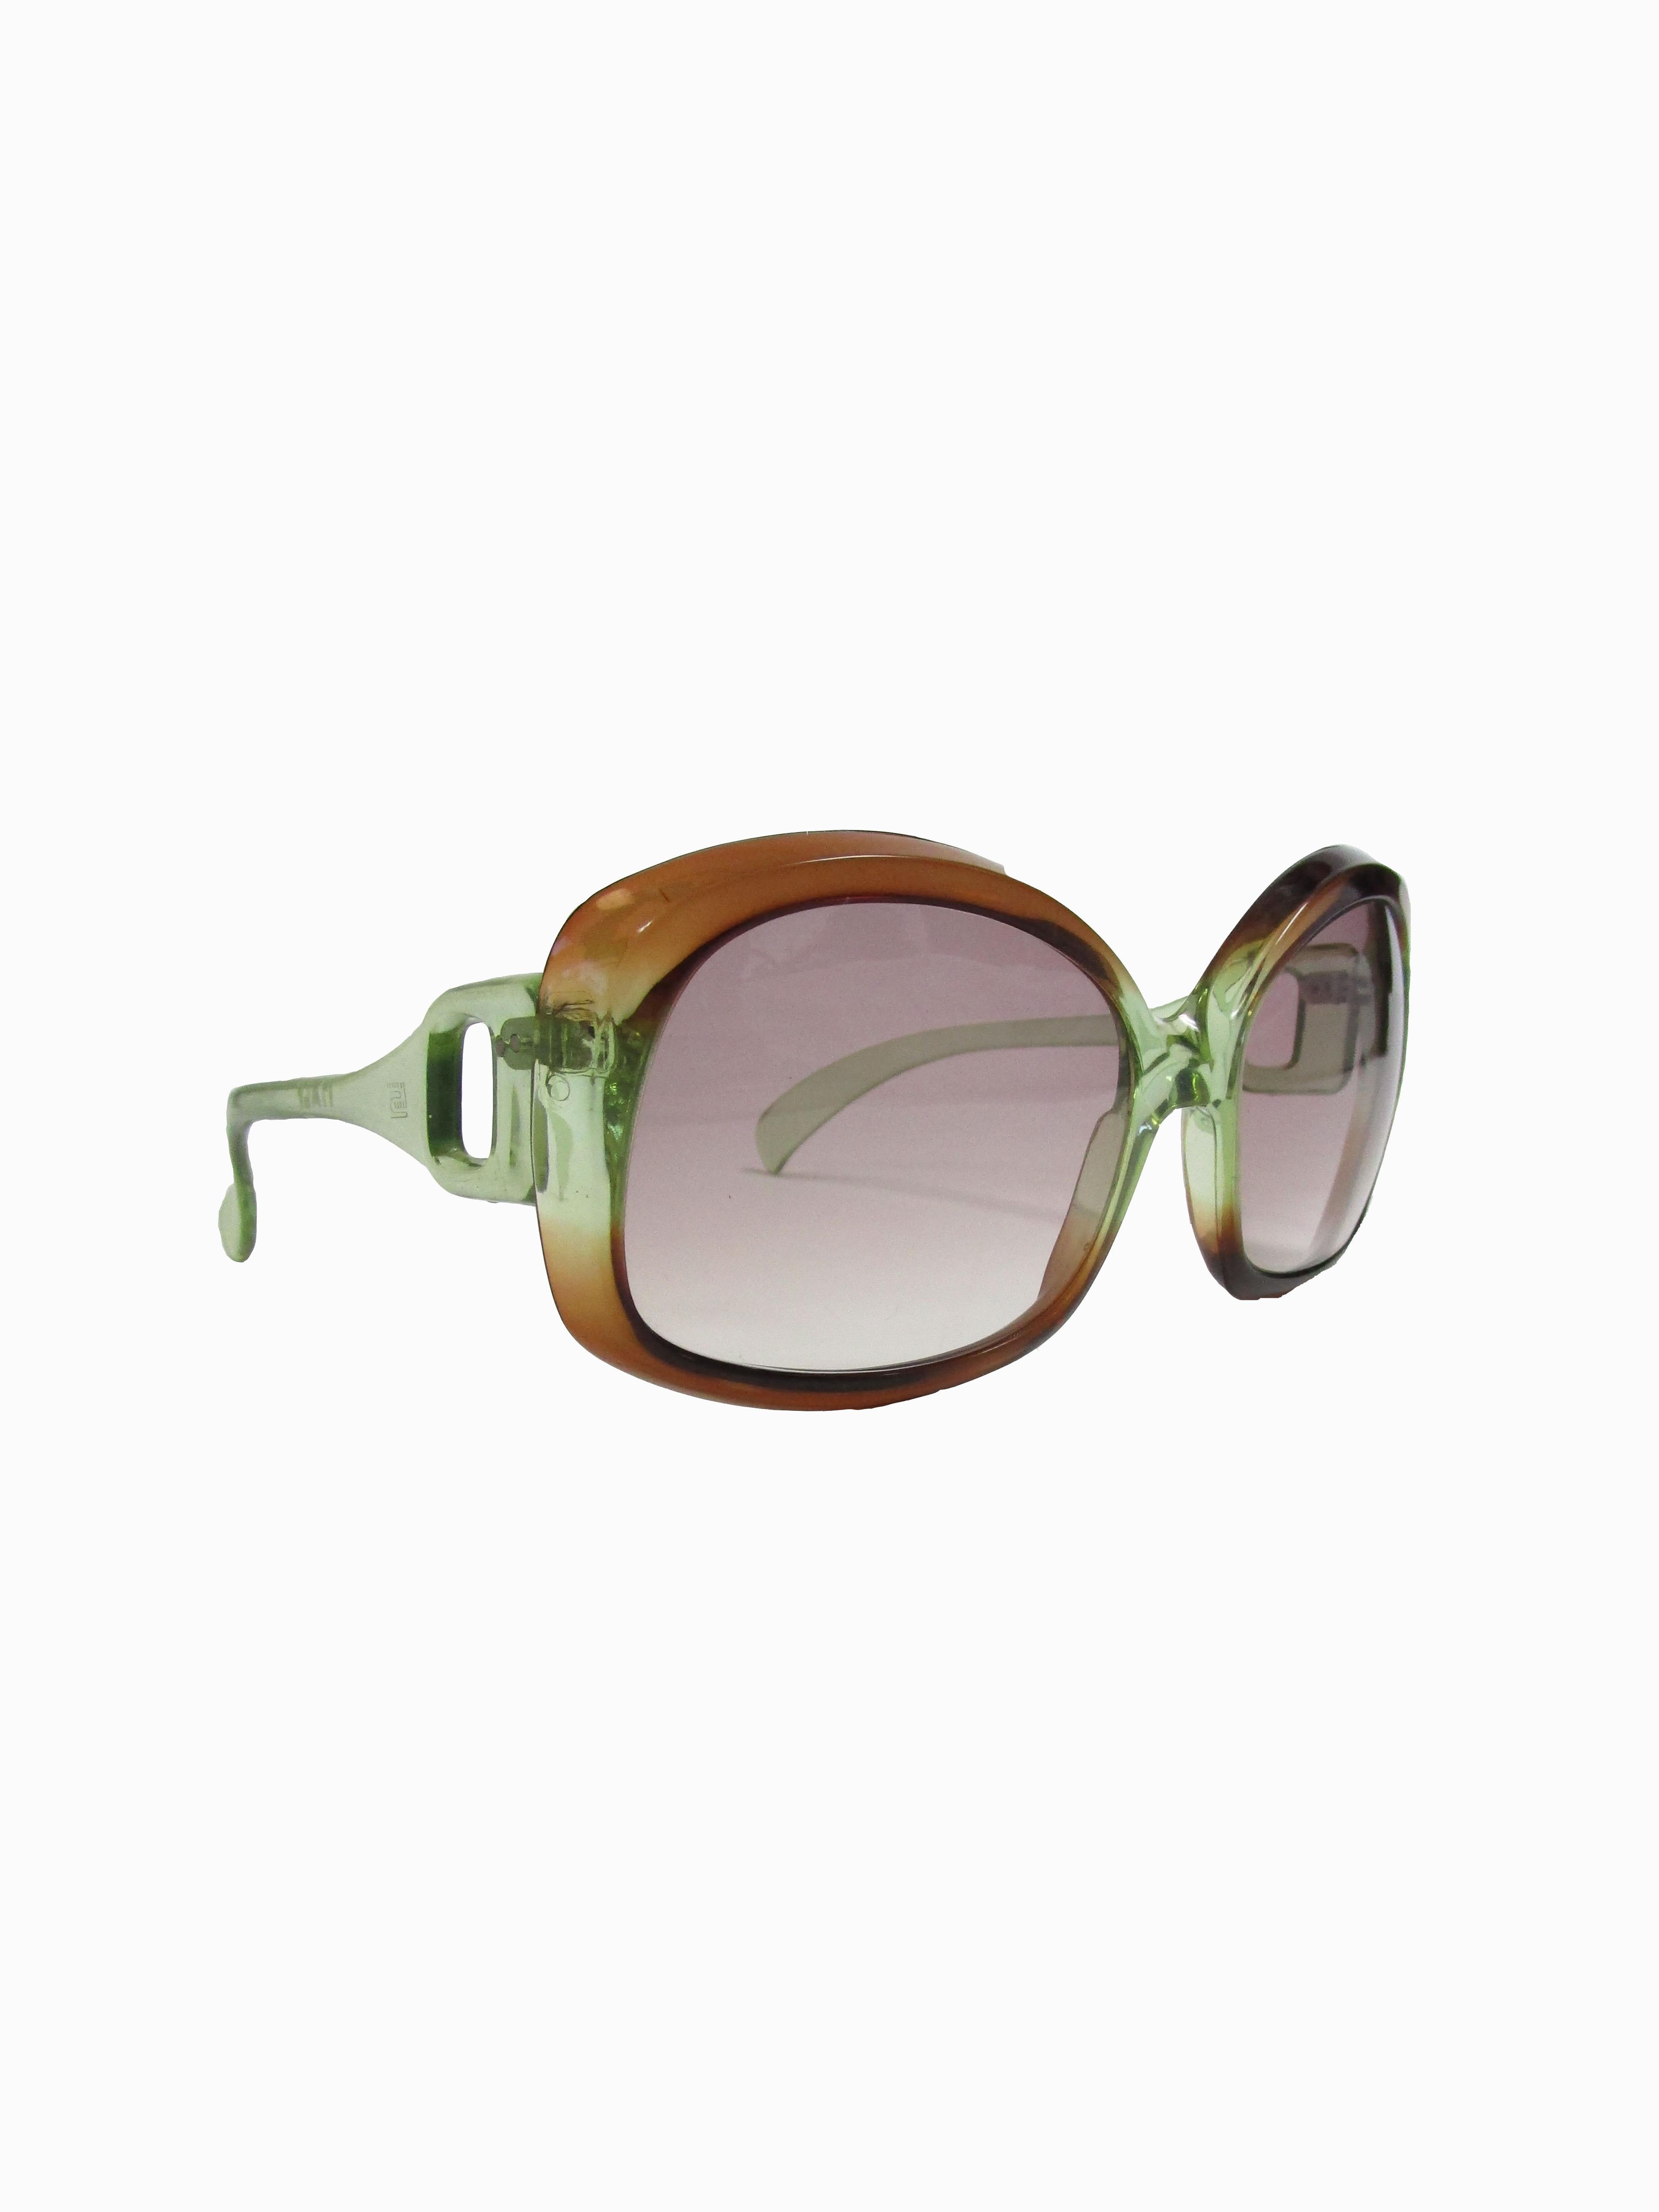 
Groovy Italian made mod sunglasses featuring over sized lenses and brown to green gradient frames.

Lens Width-60mm
Bridge Width- 25mm
Temple (arm) Length - 152mm